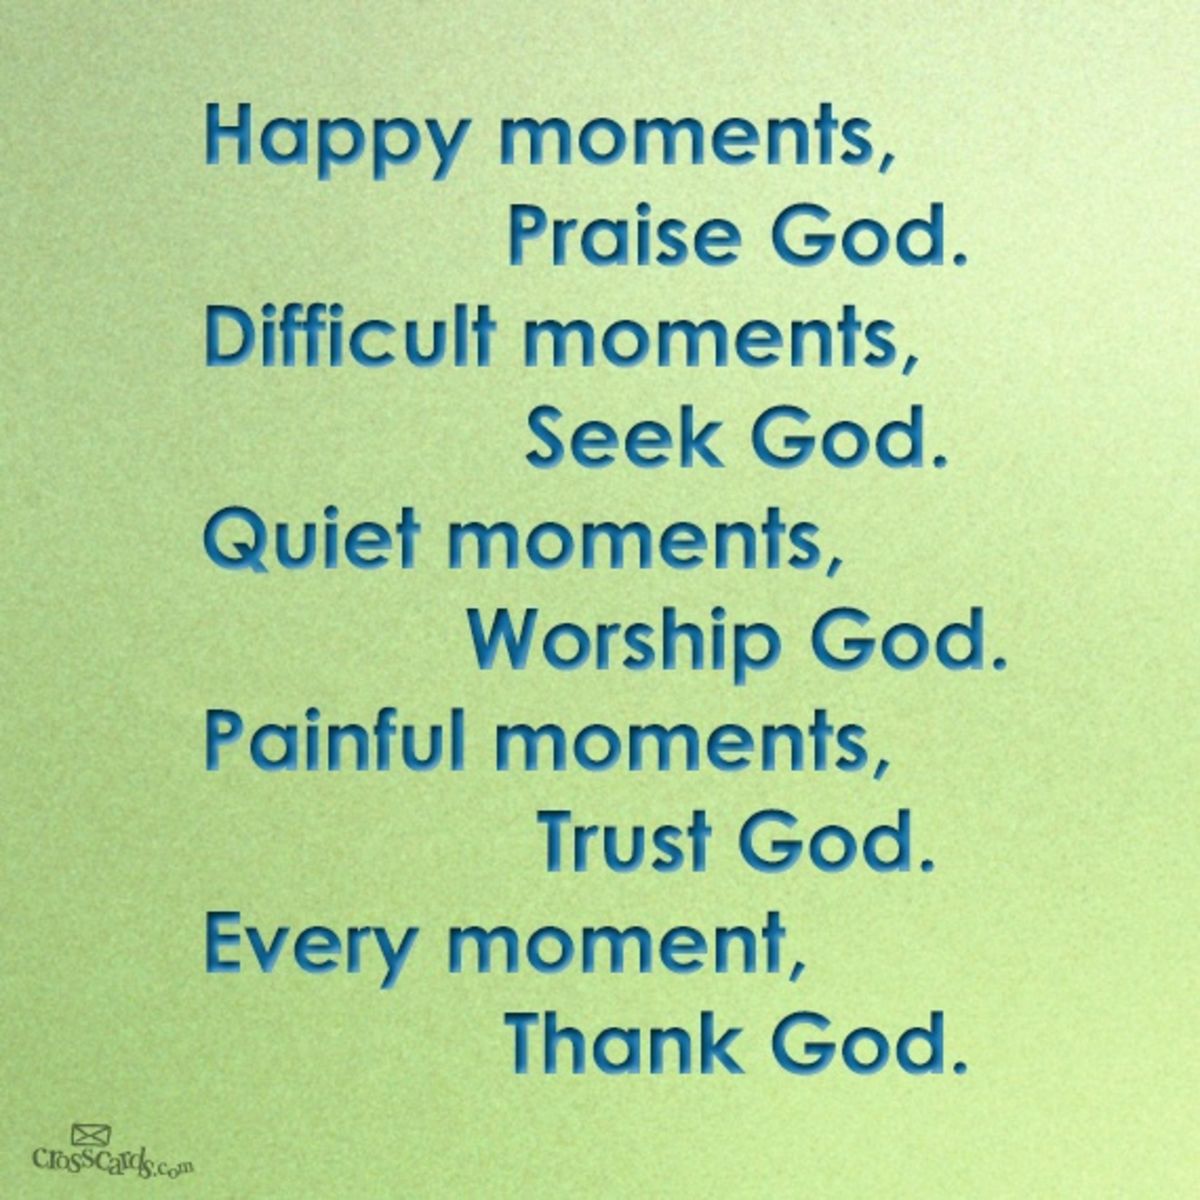 10807-moments happy difficult seek praise quiet worship painful trust every thank moment god d...jpg